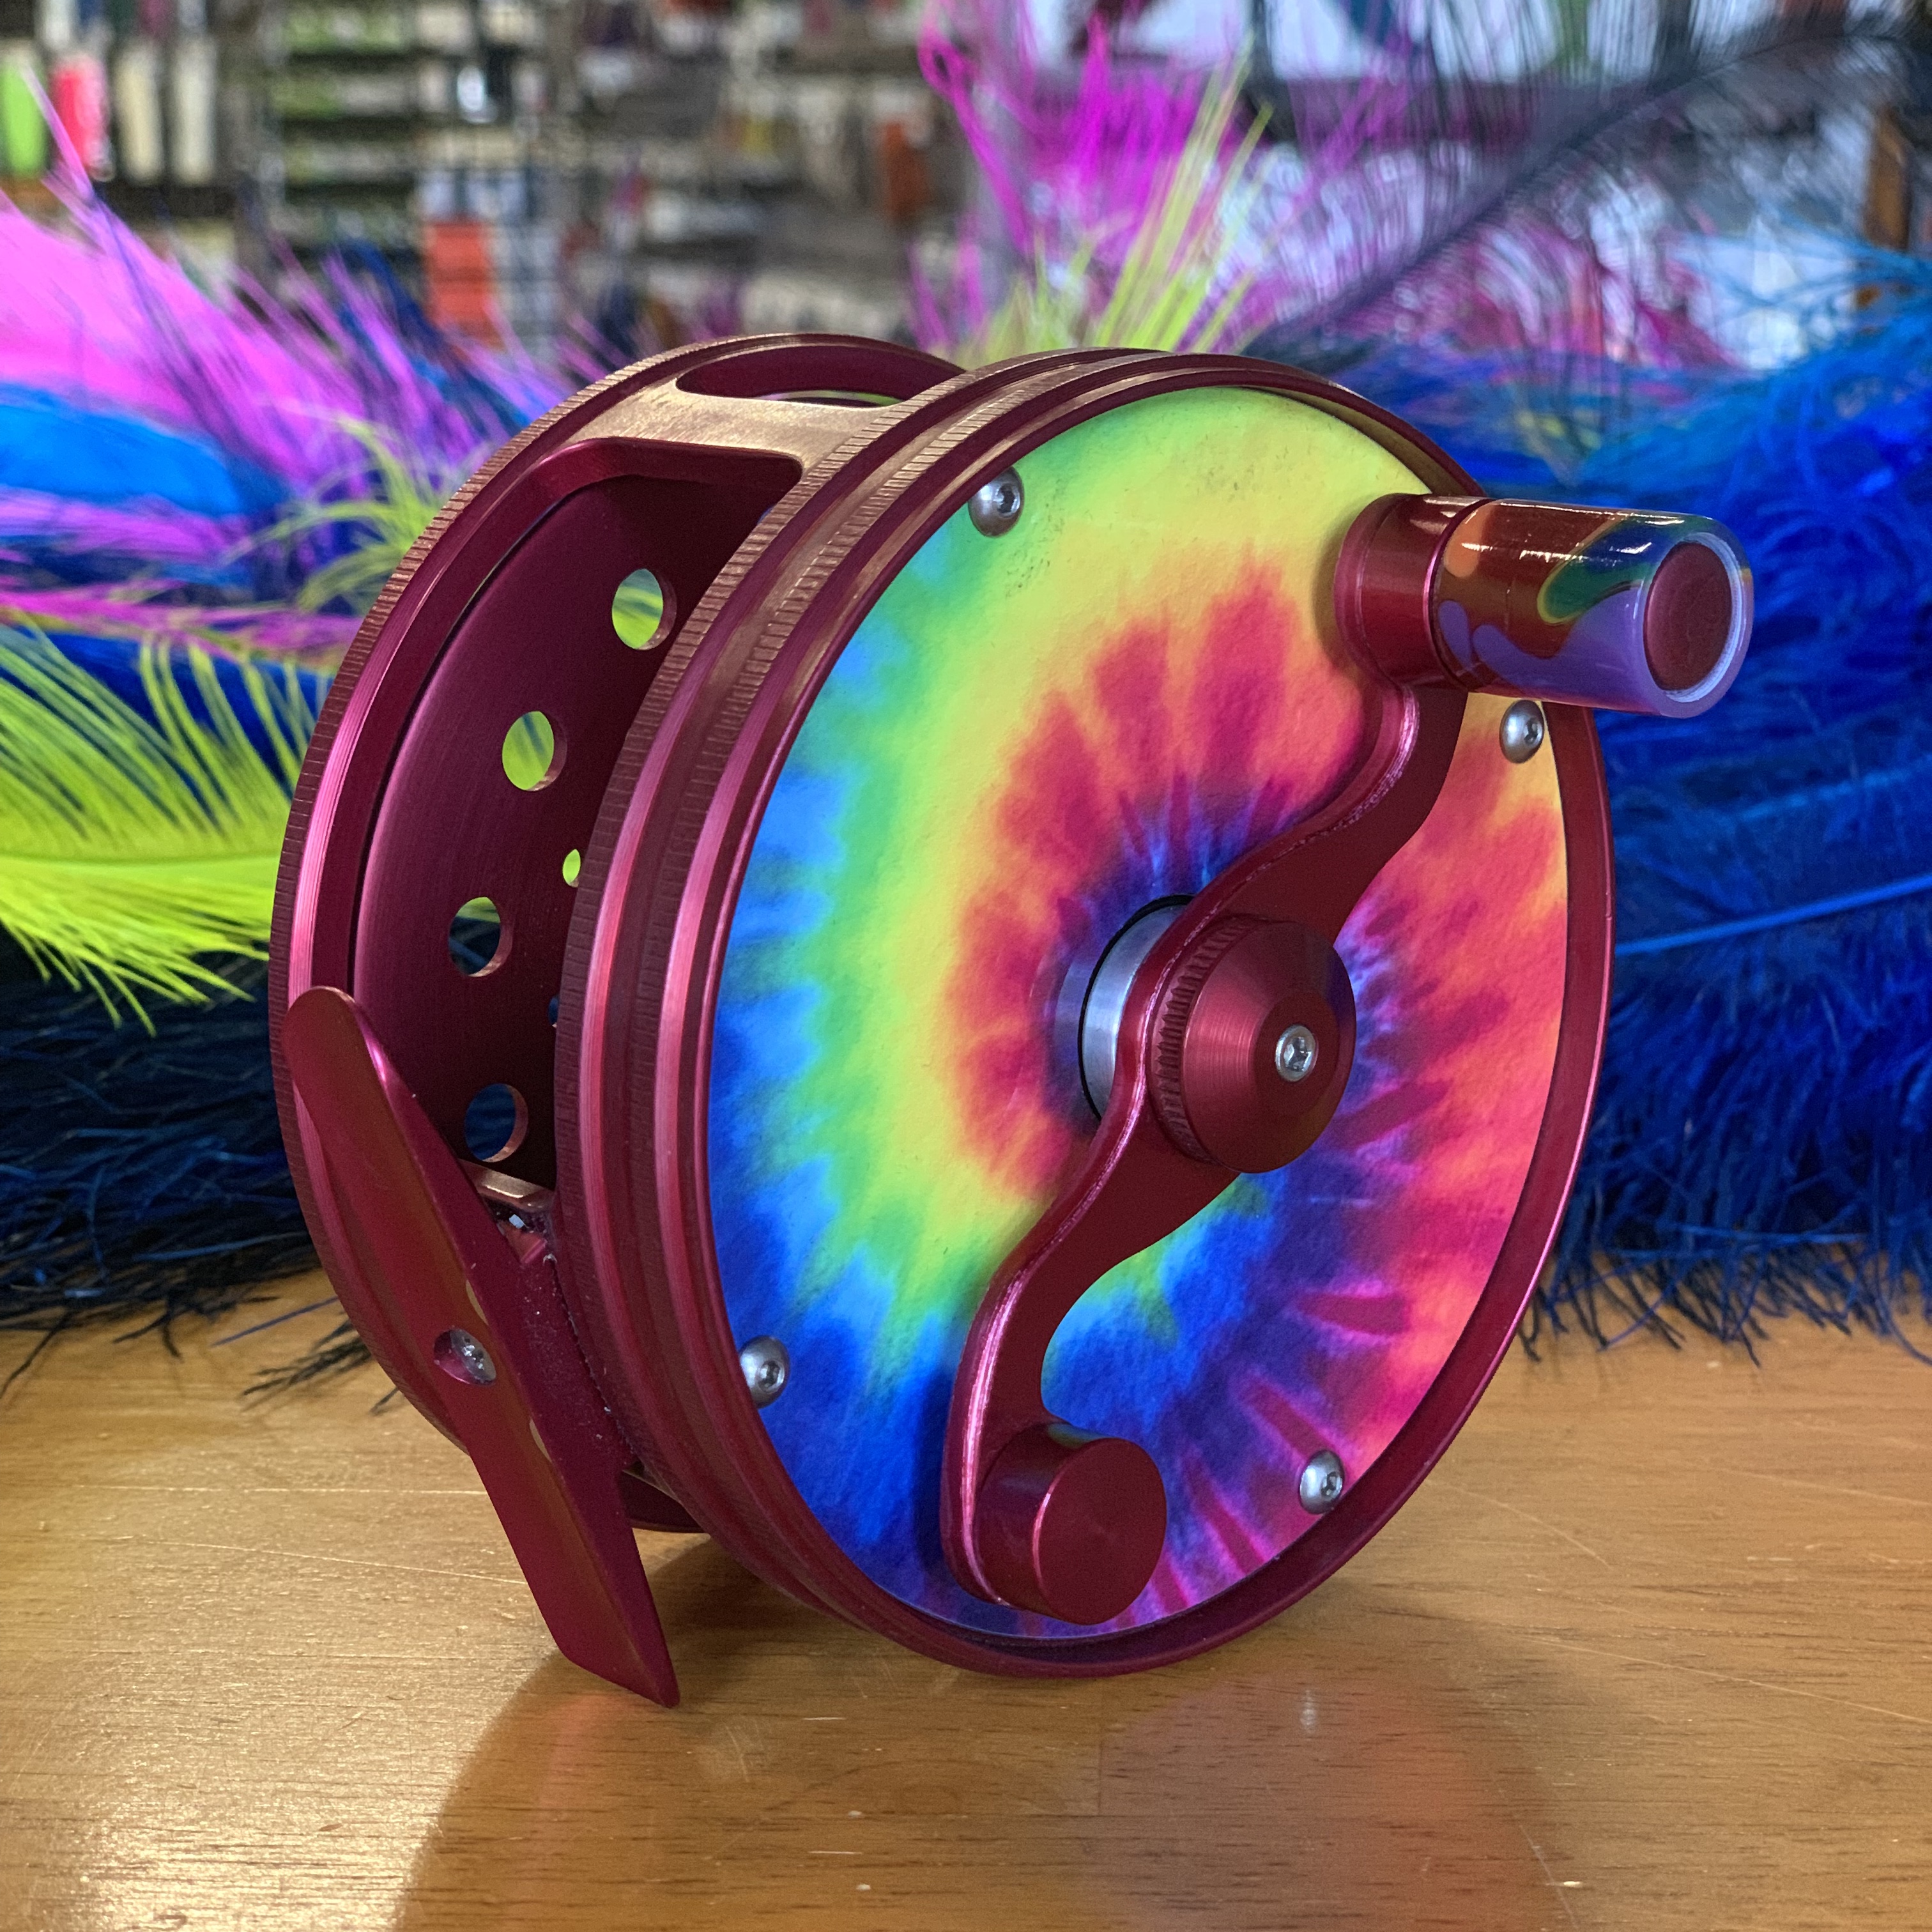 Speyco 4 Skagit Reel - Red Frame with Tie-Dye Face - $675.00